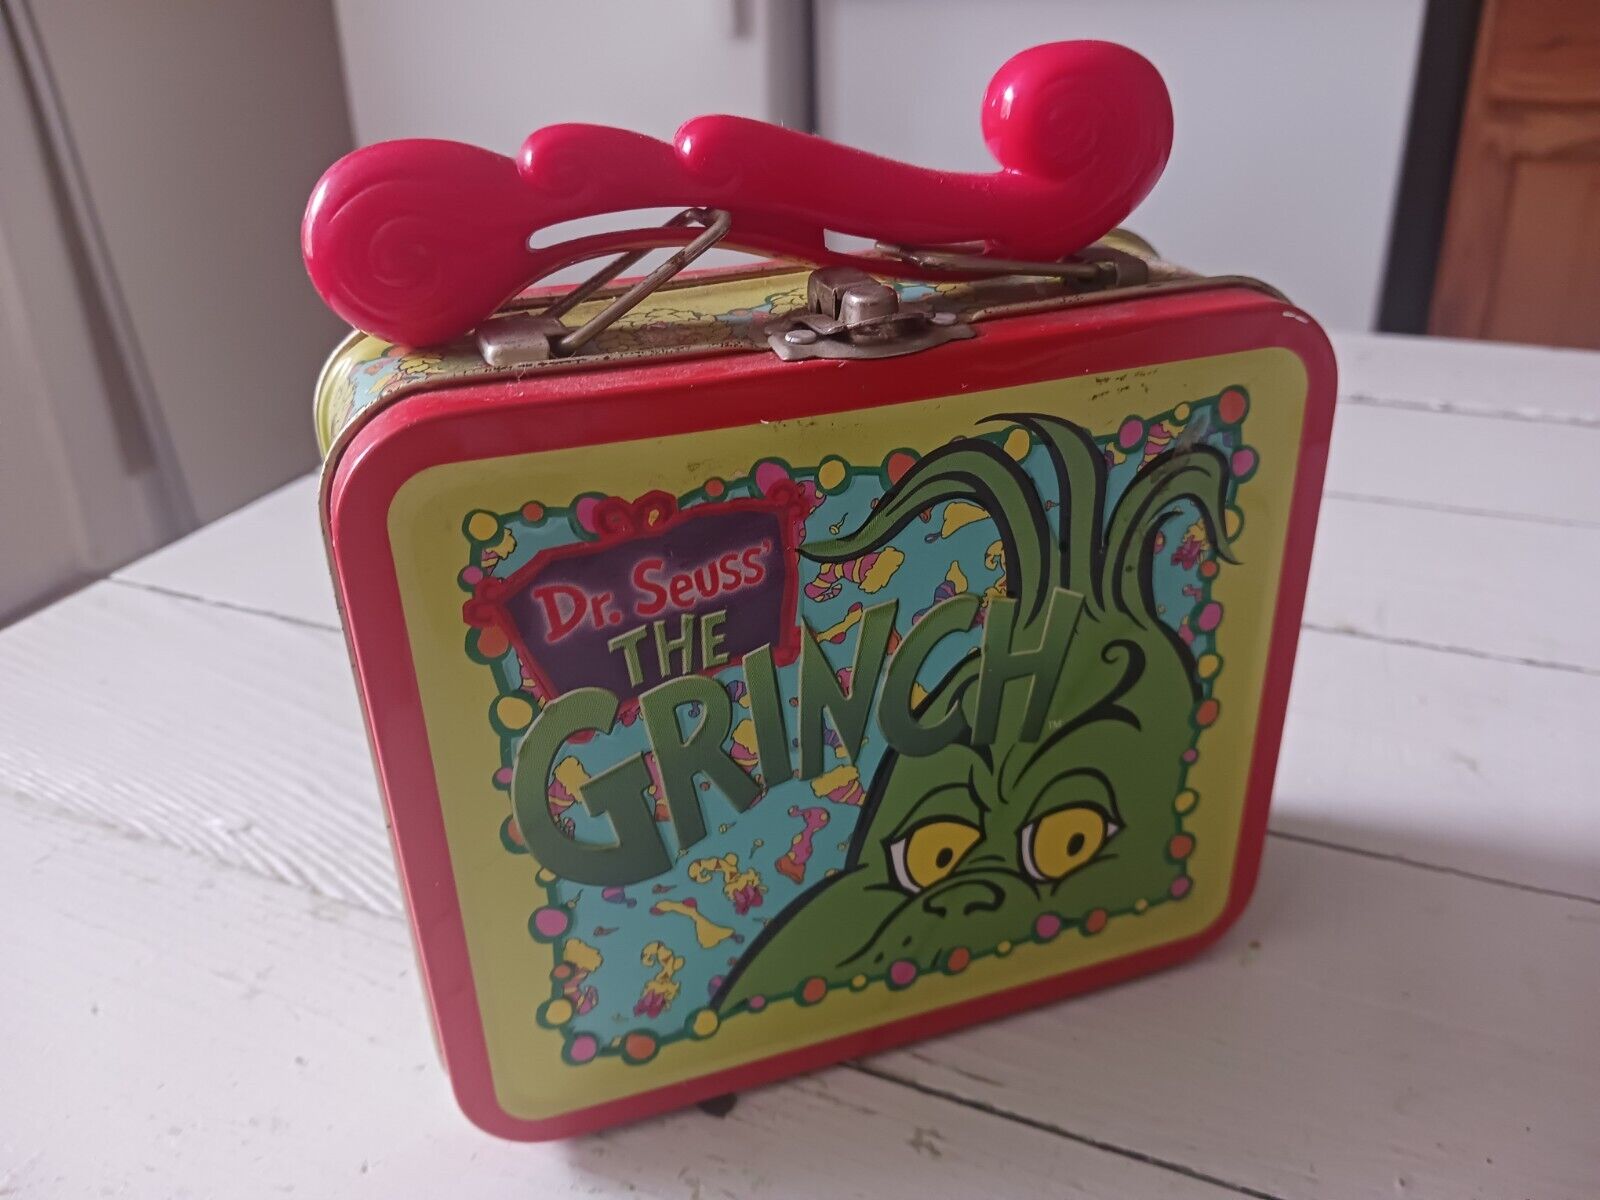 Vintage 2001 How The Grinch Stole Christmas Metal Lunch Box